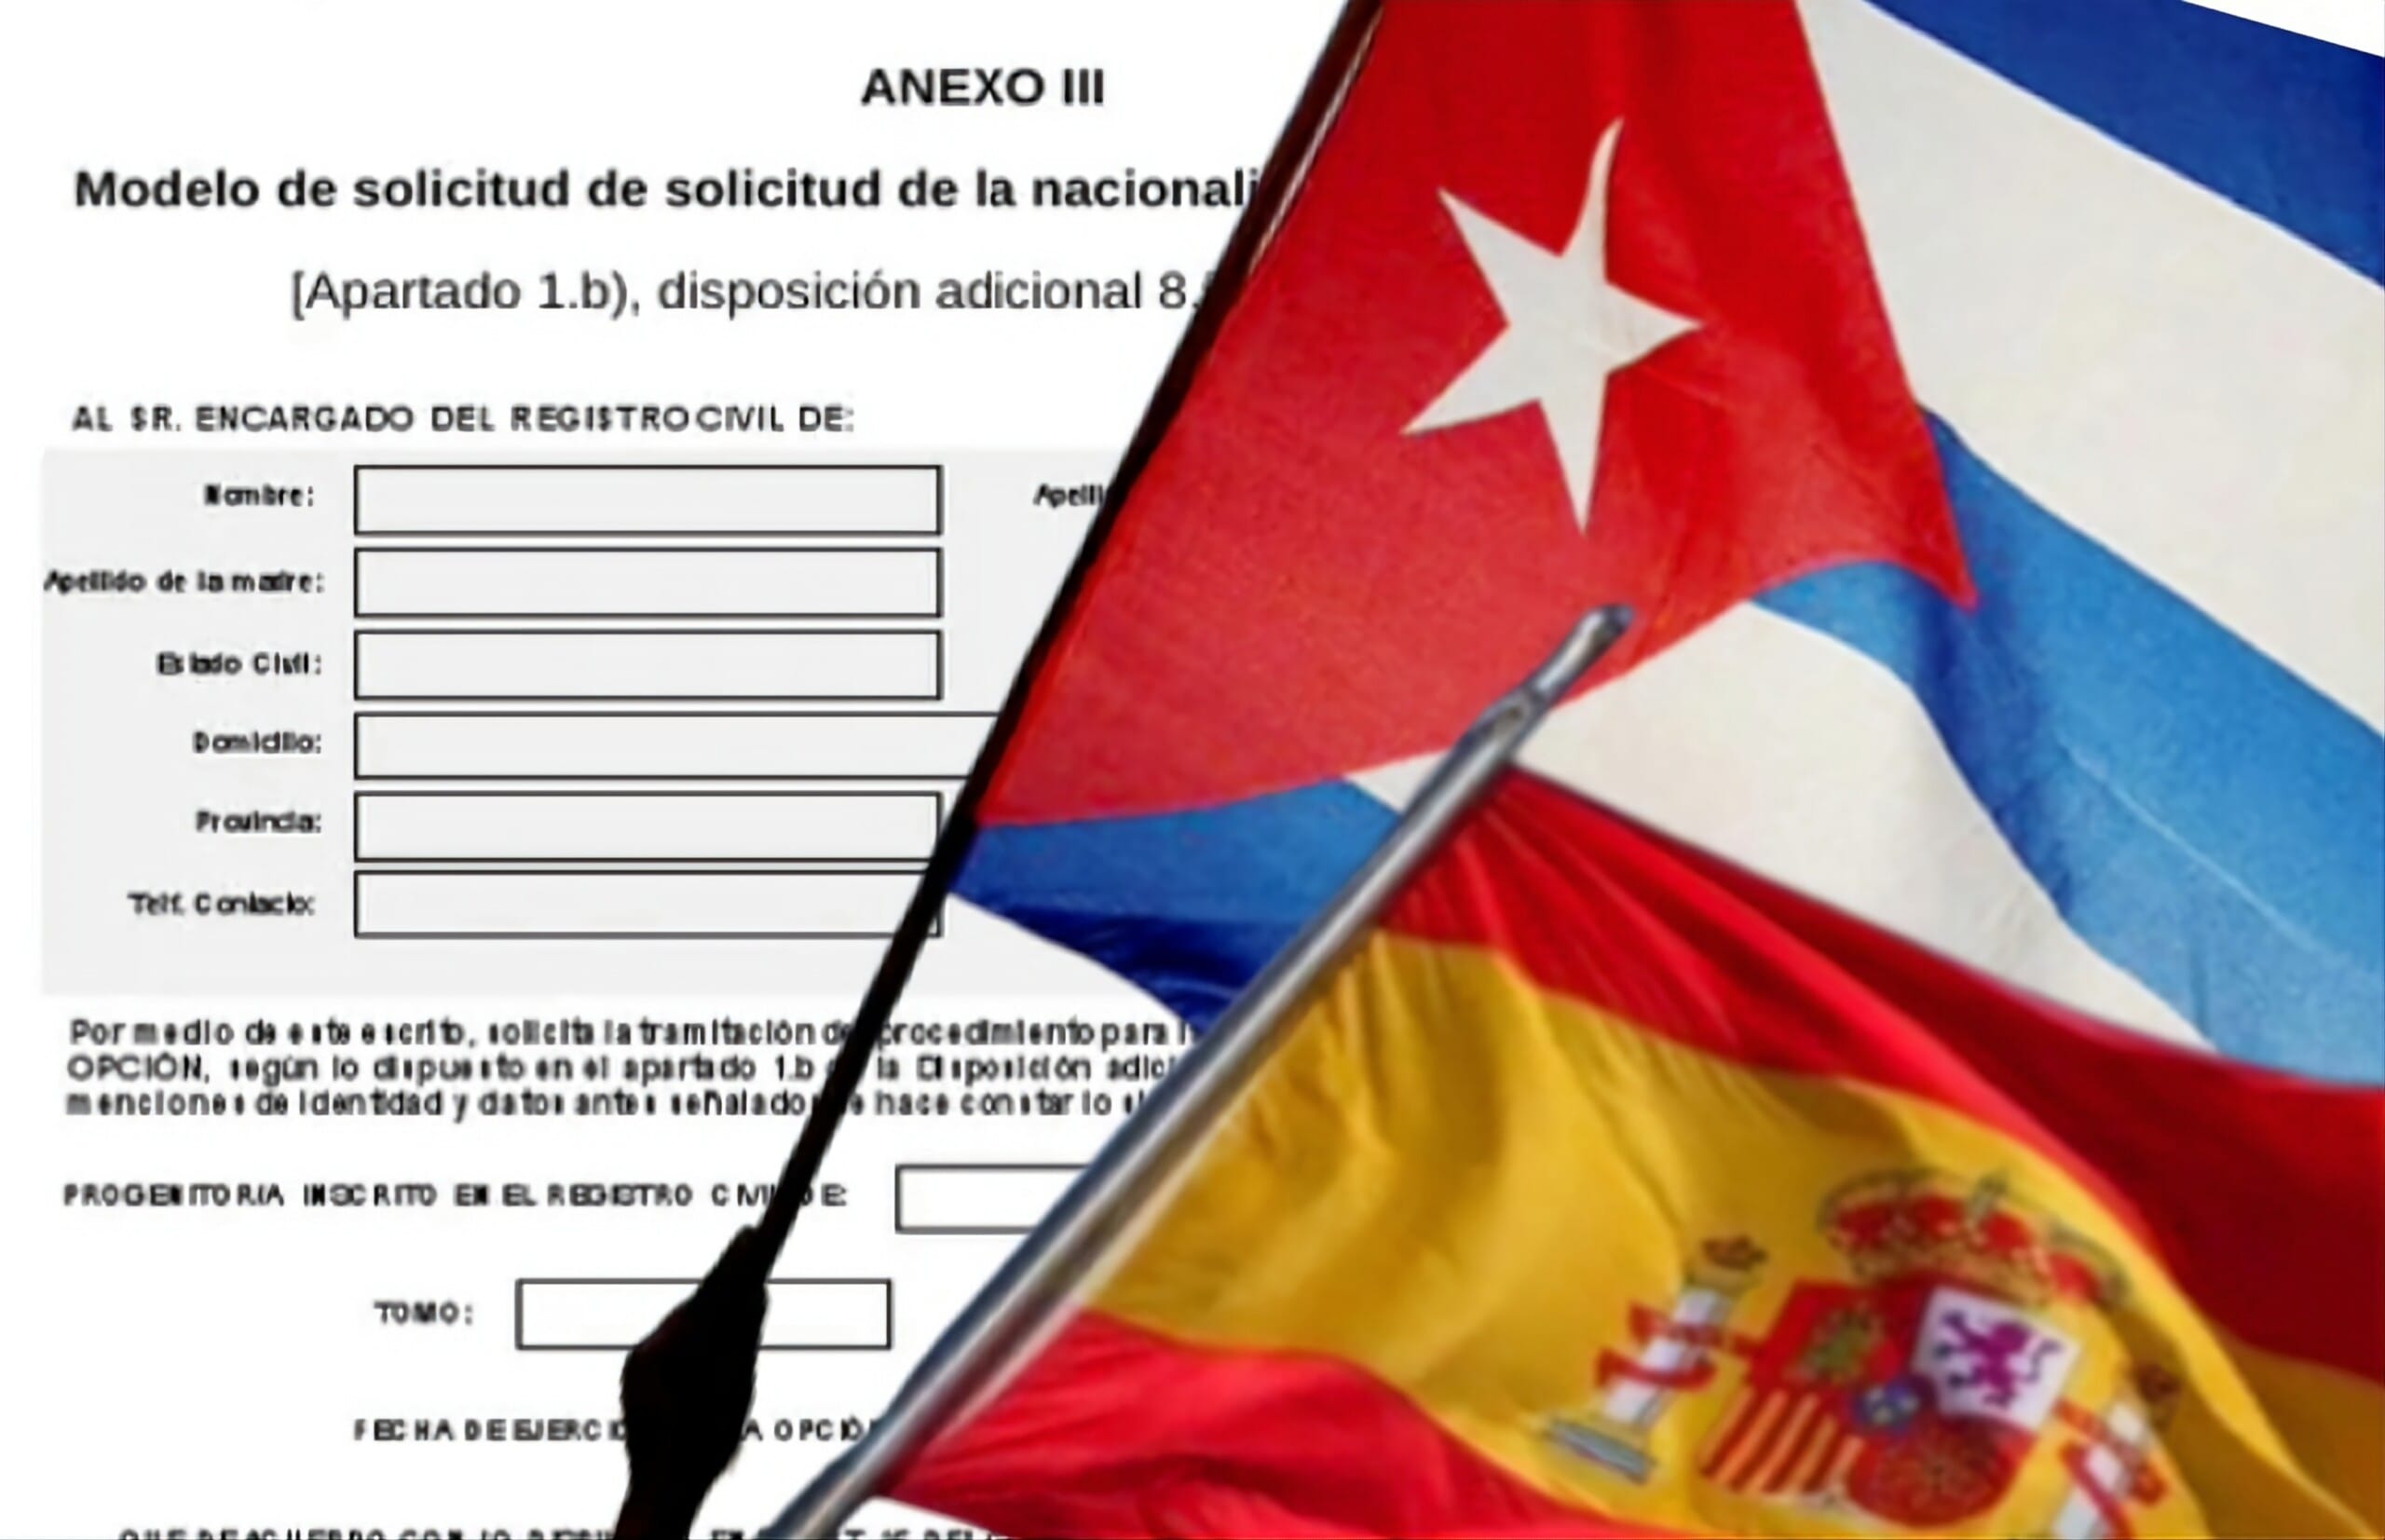 More than 20,000 Cubans have already become Spanish citizens thanks to the Netos Law